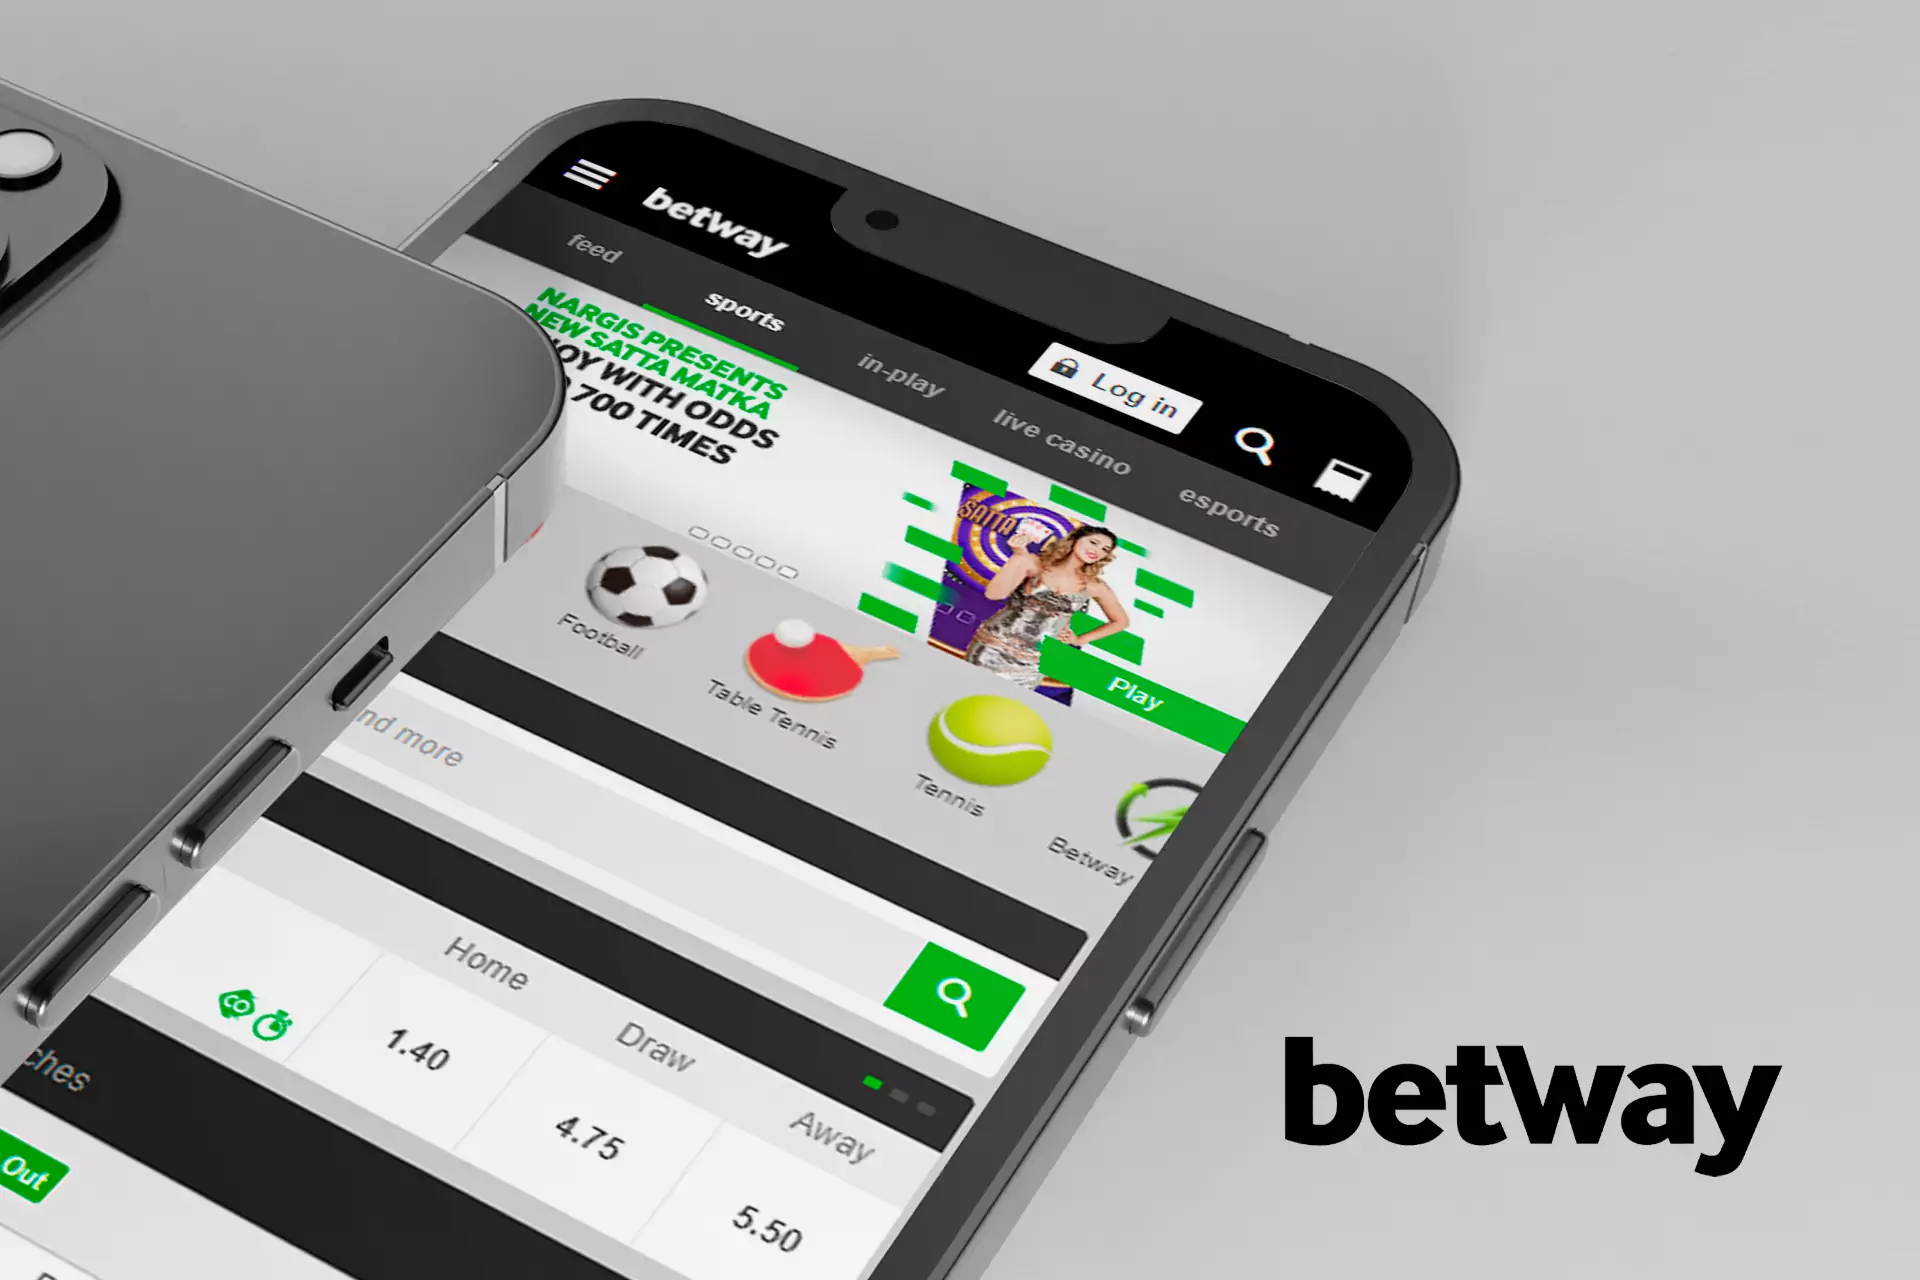 Various betting options are available in the Betway app.